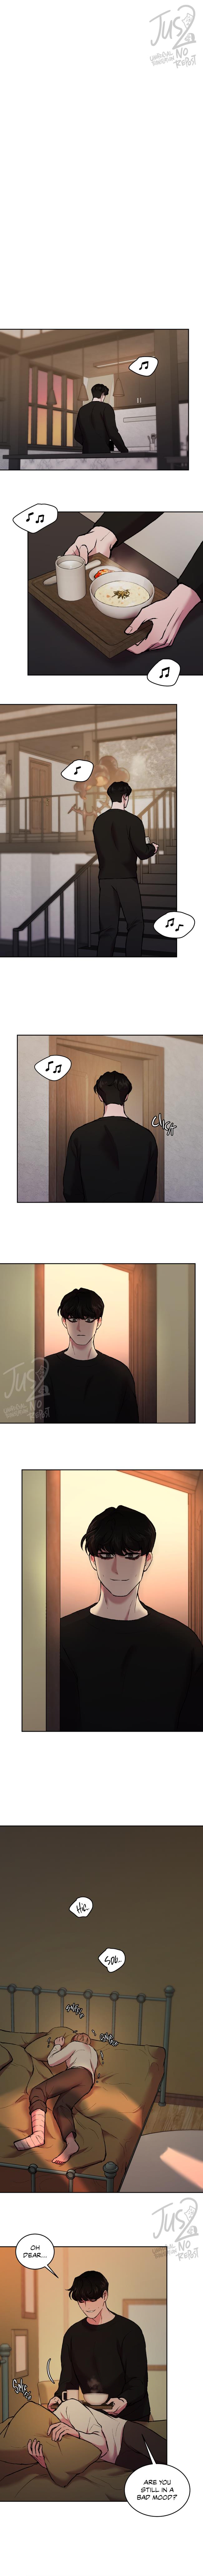 Hwanyoung's Misery - Page 1